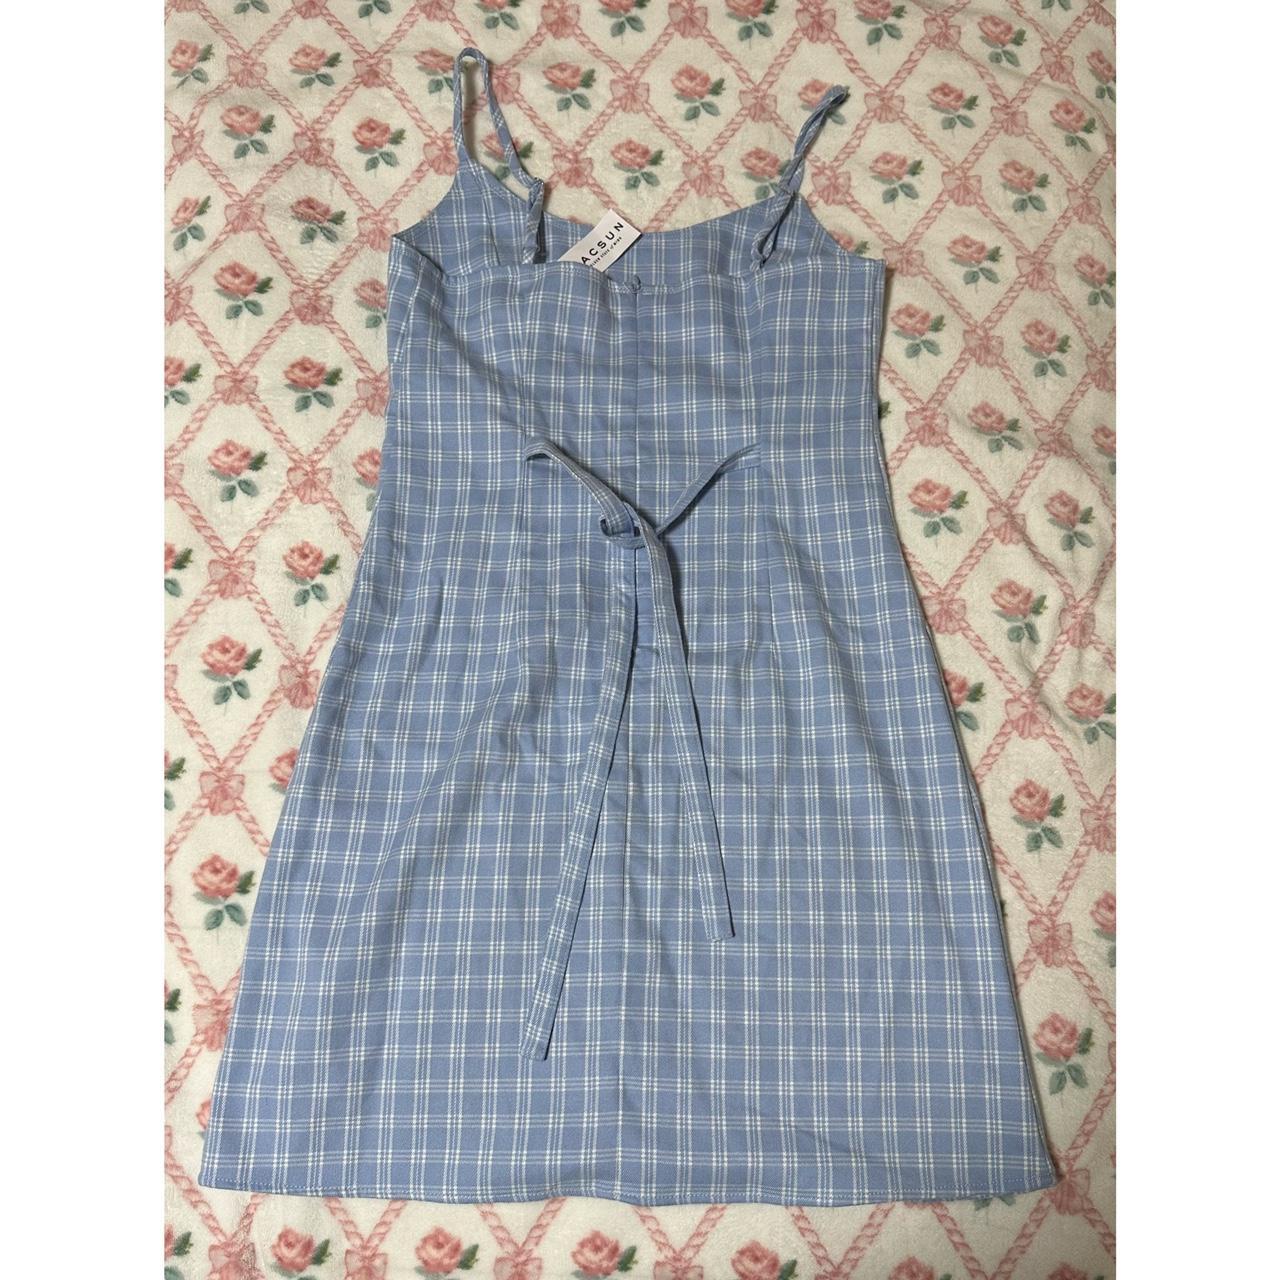 Brandy Melville baby blue floral Colleen dress💙 This - Depop